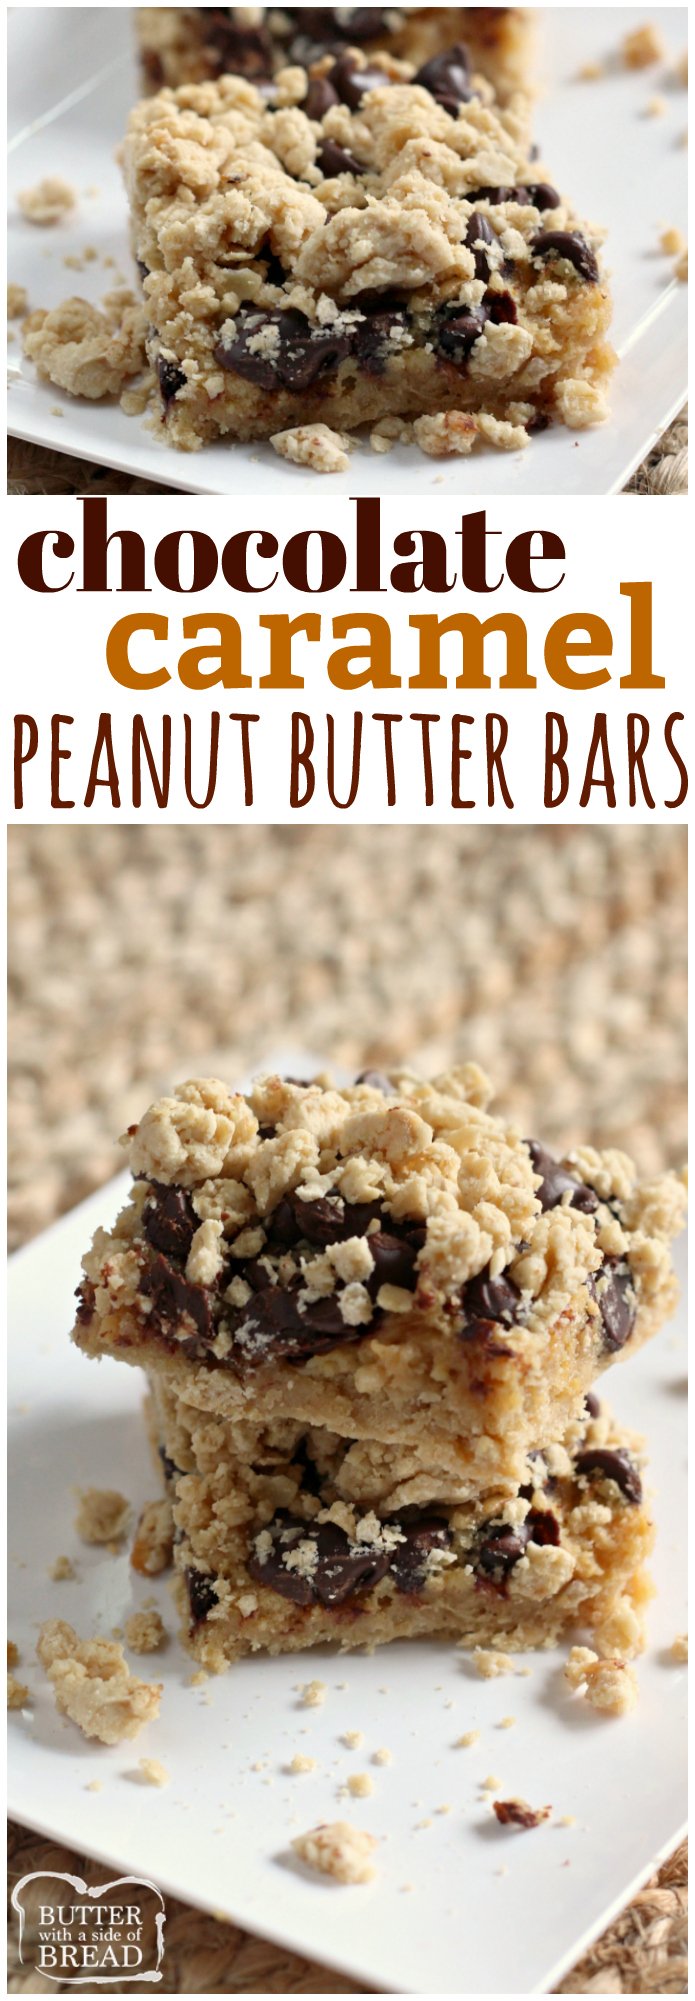 Chocolate Caramel Peanut Butter Bars begin with a cake mix and end with peanut butter, caramel topping, cream cheese, and chocolate! These amazing dessert bars combine all of your favorite flavors in one delectable treat!